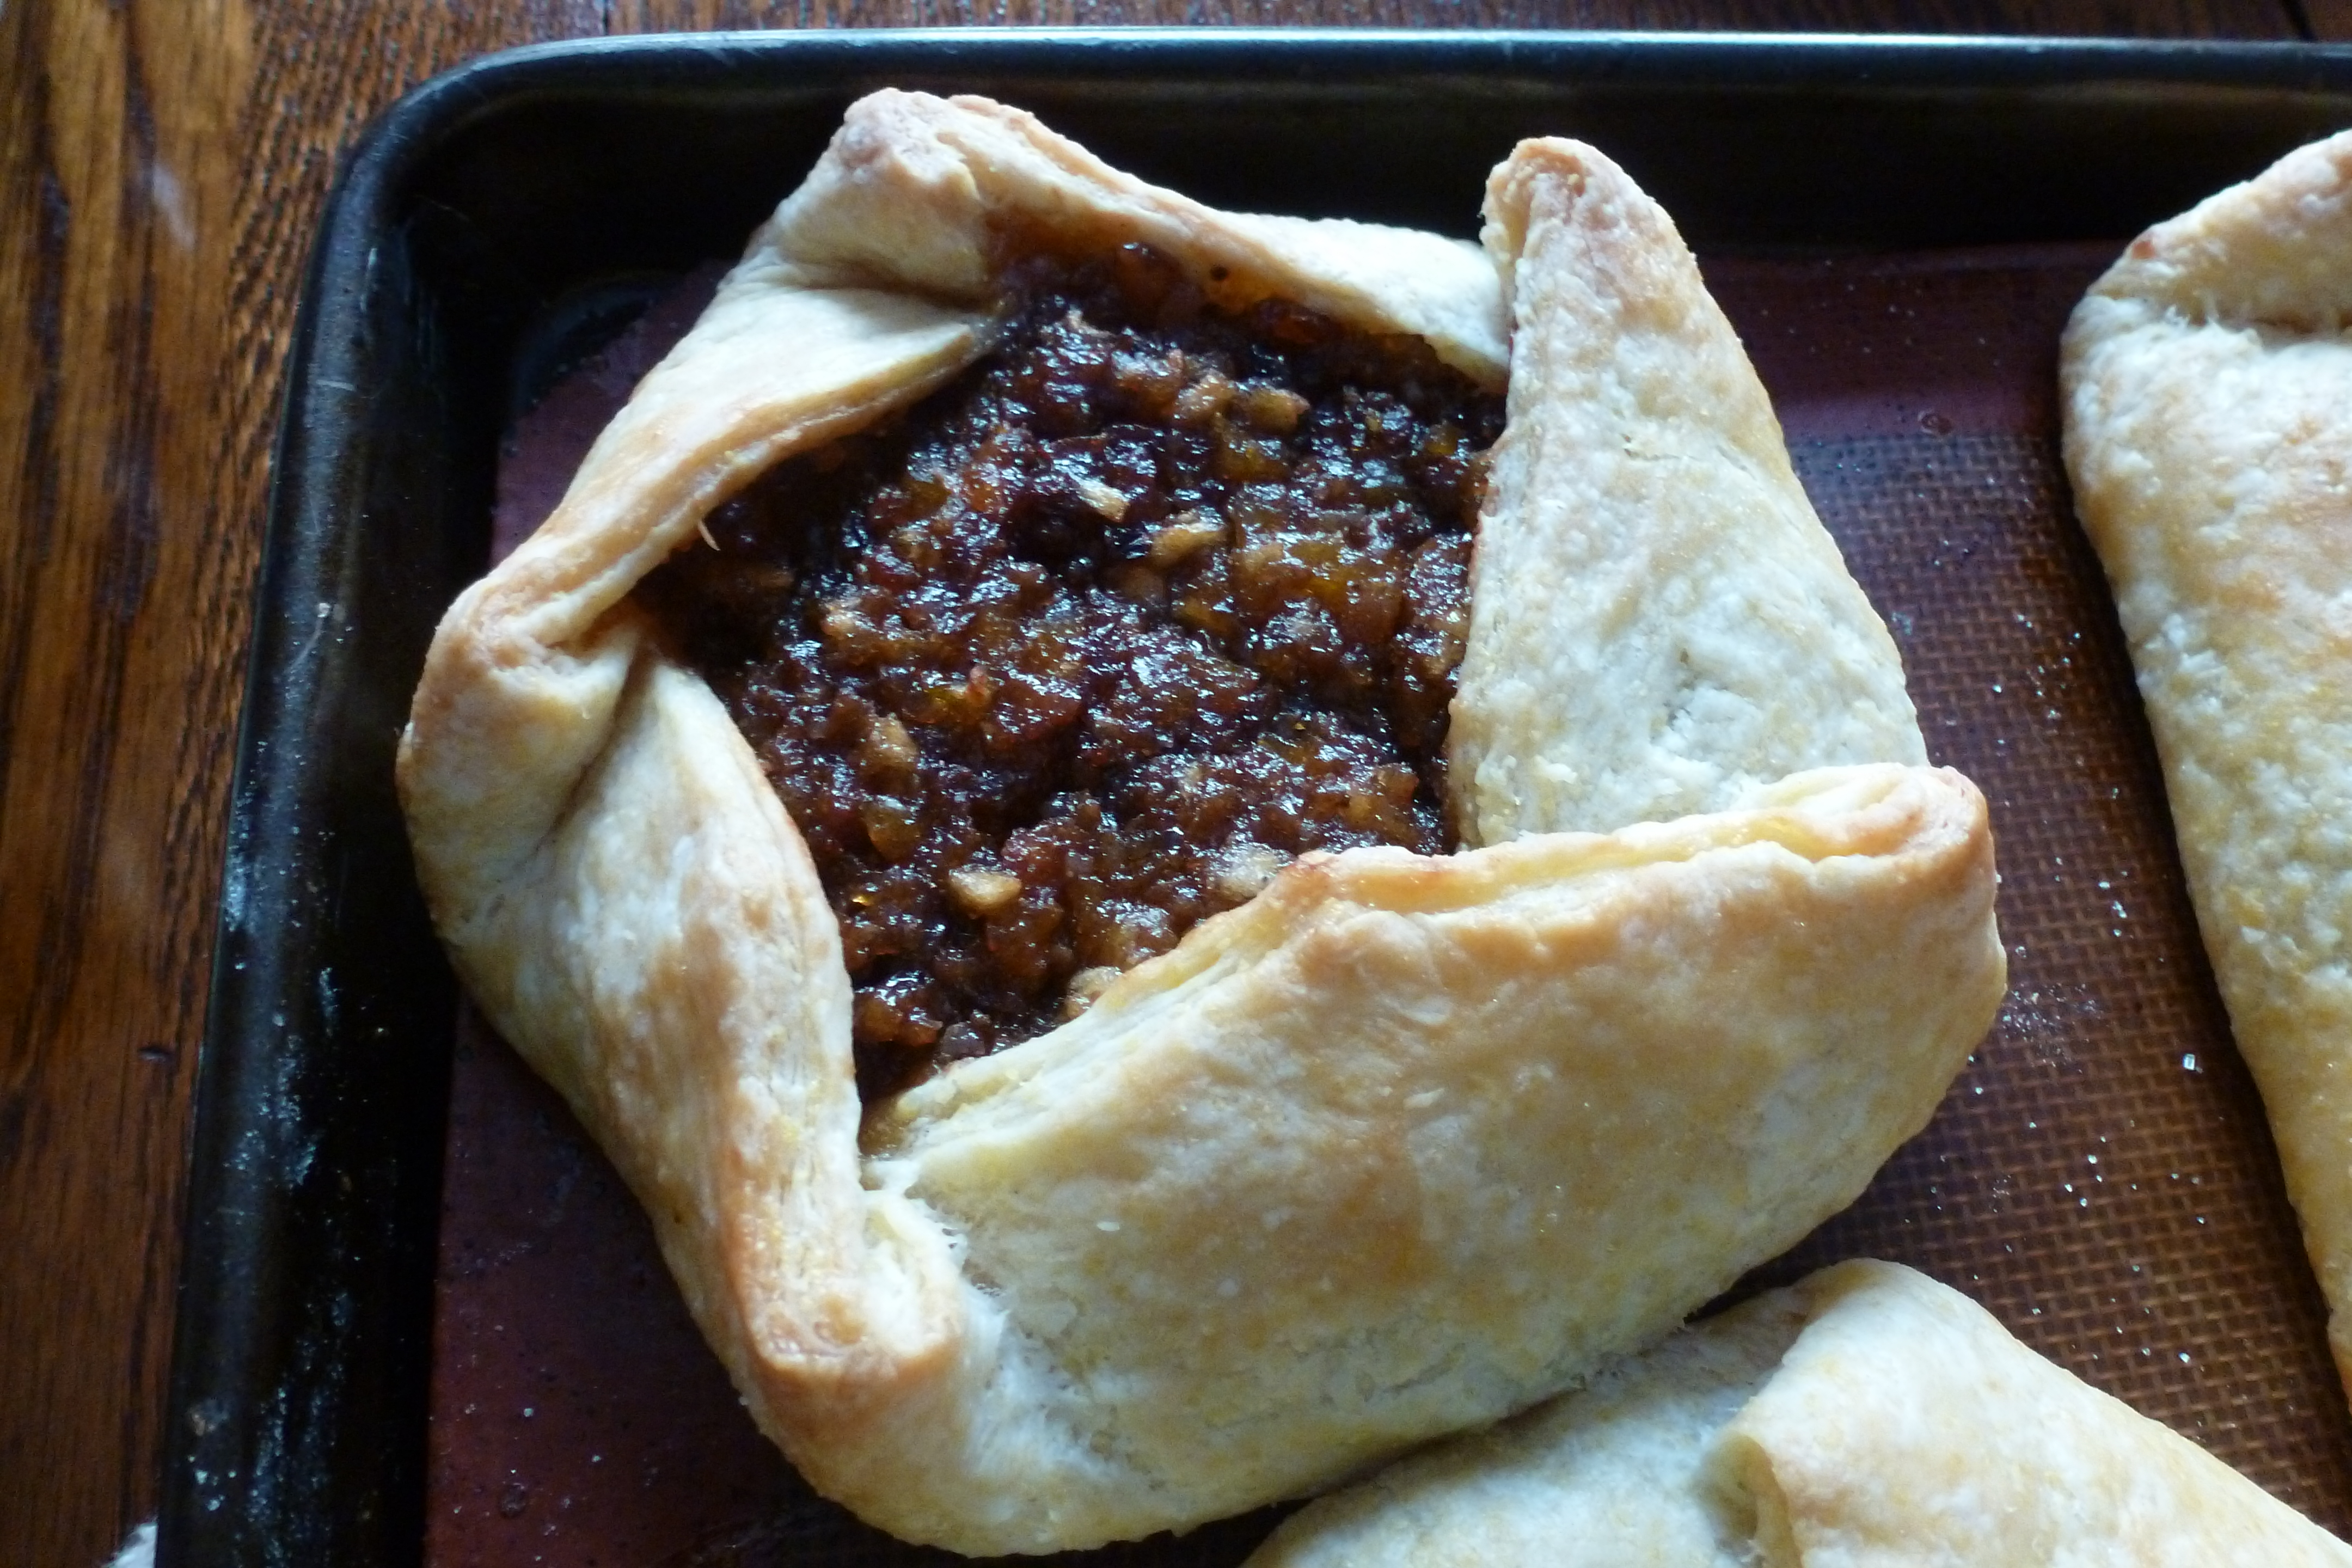 An individual mincemeat pie